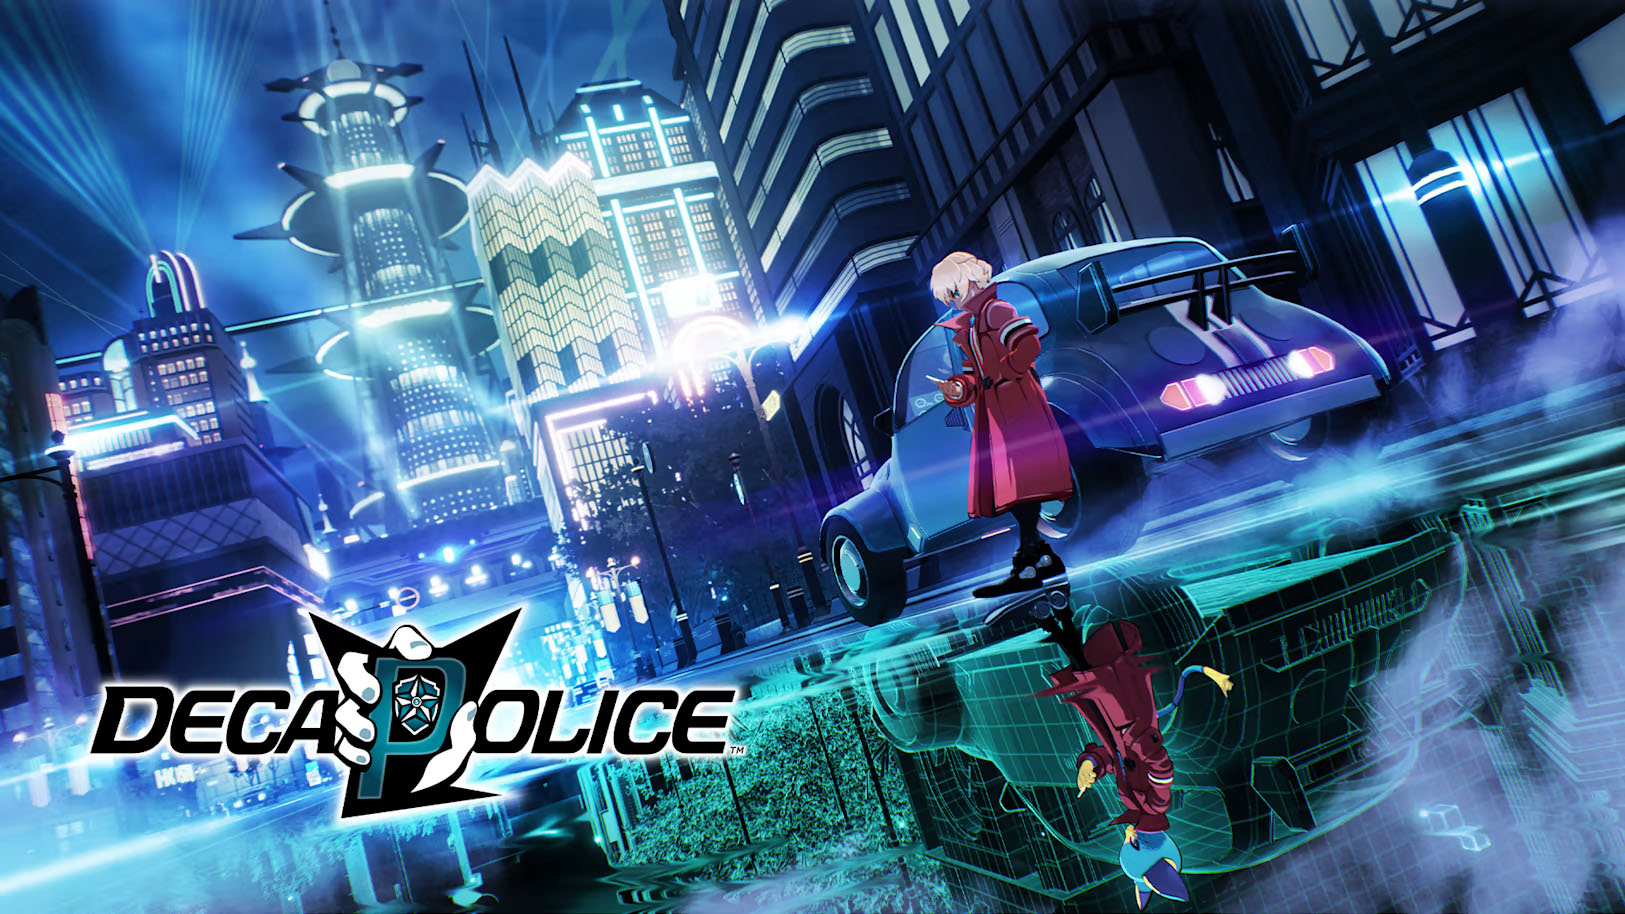 DECAPOLICE announced, a new crime RPG from Level-5